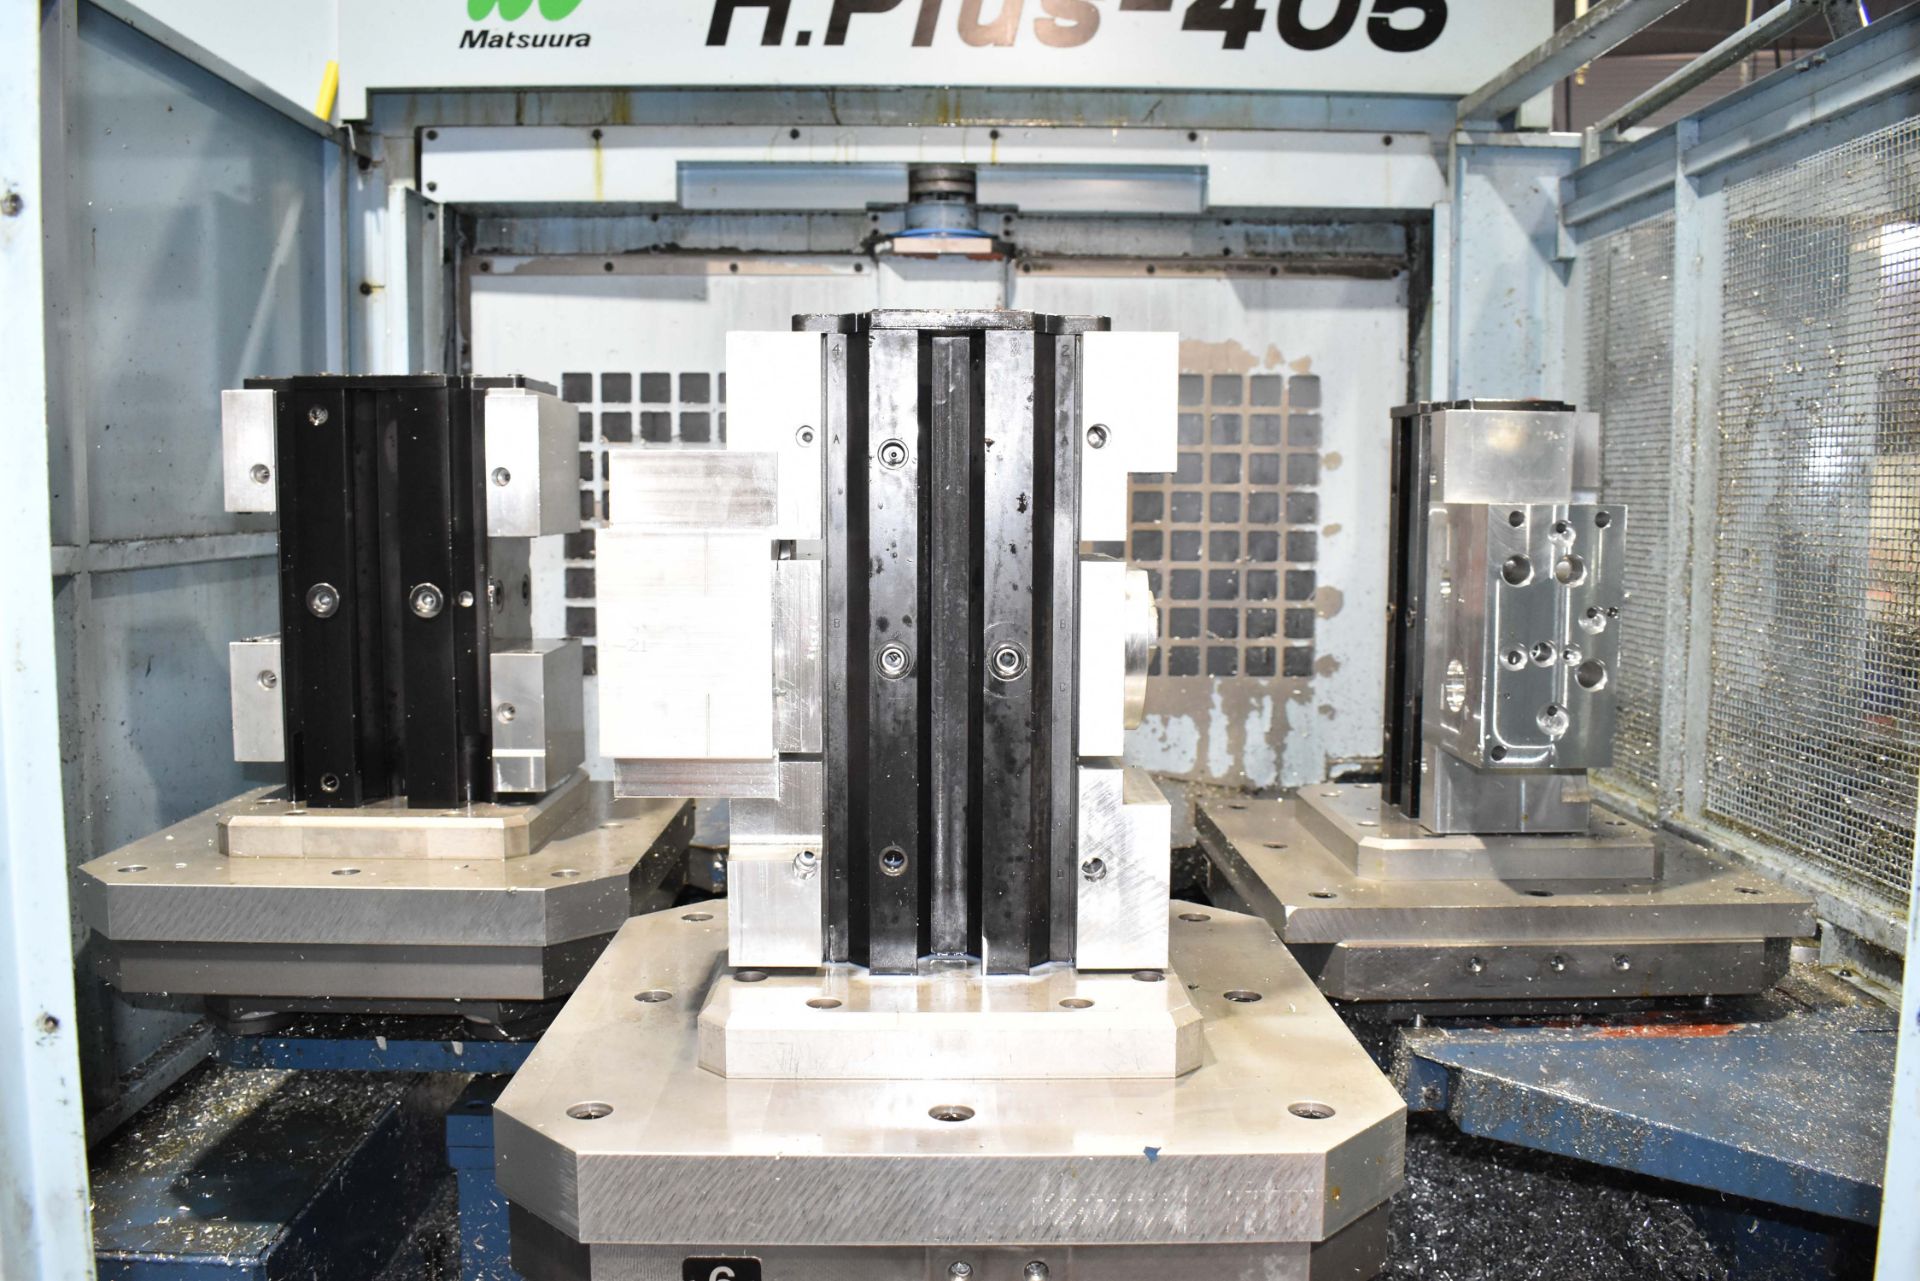 MATSUURA (2006) H.PLUS-405 4-AXIS MULTI-PALLET HIGH-SPEED CNC HORIZONTAL MACHINING CENTER WITH - Image 8 of 14